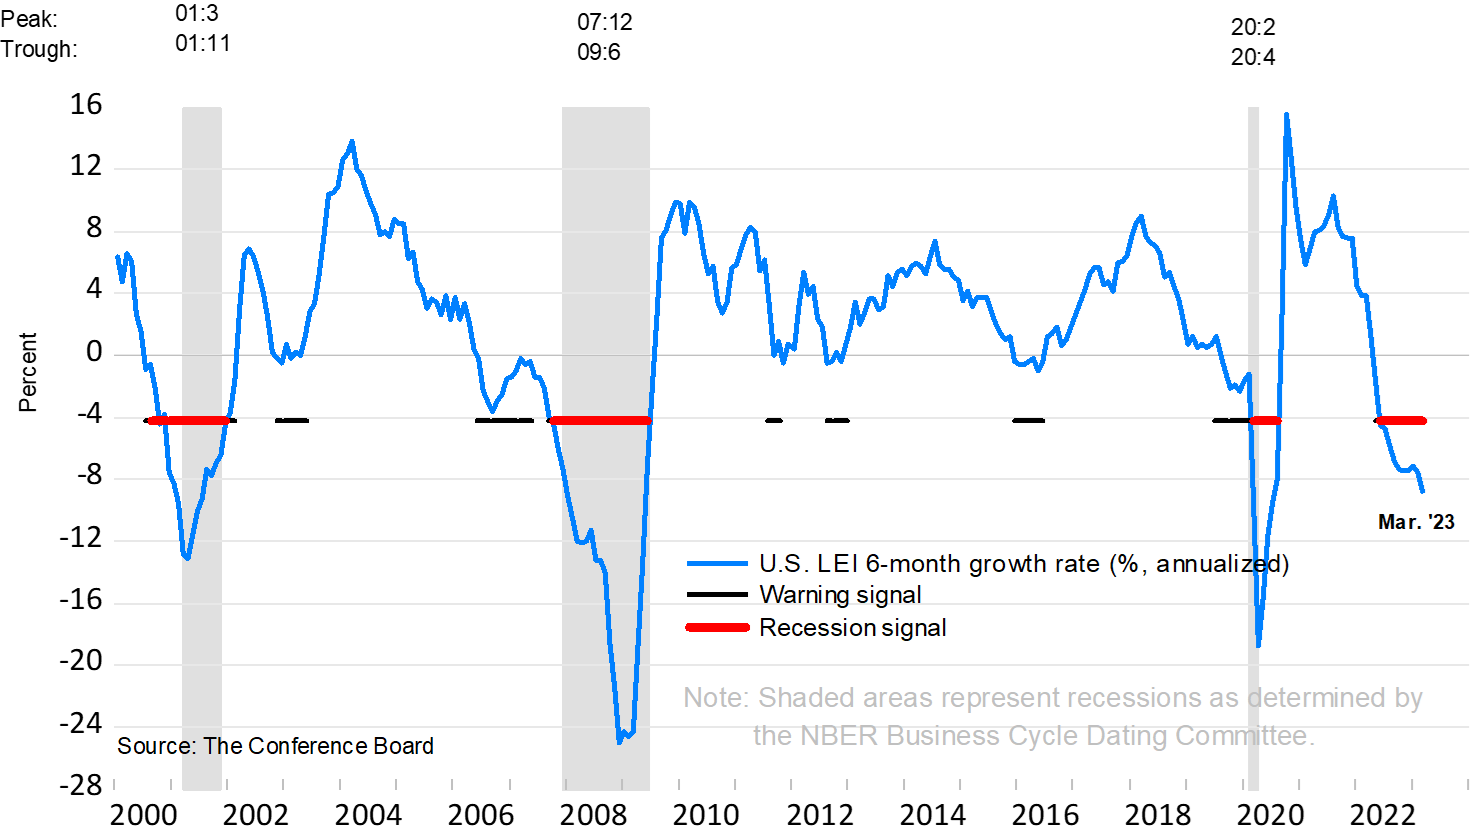 CB Economic Index and recession warning